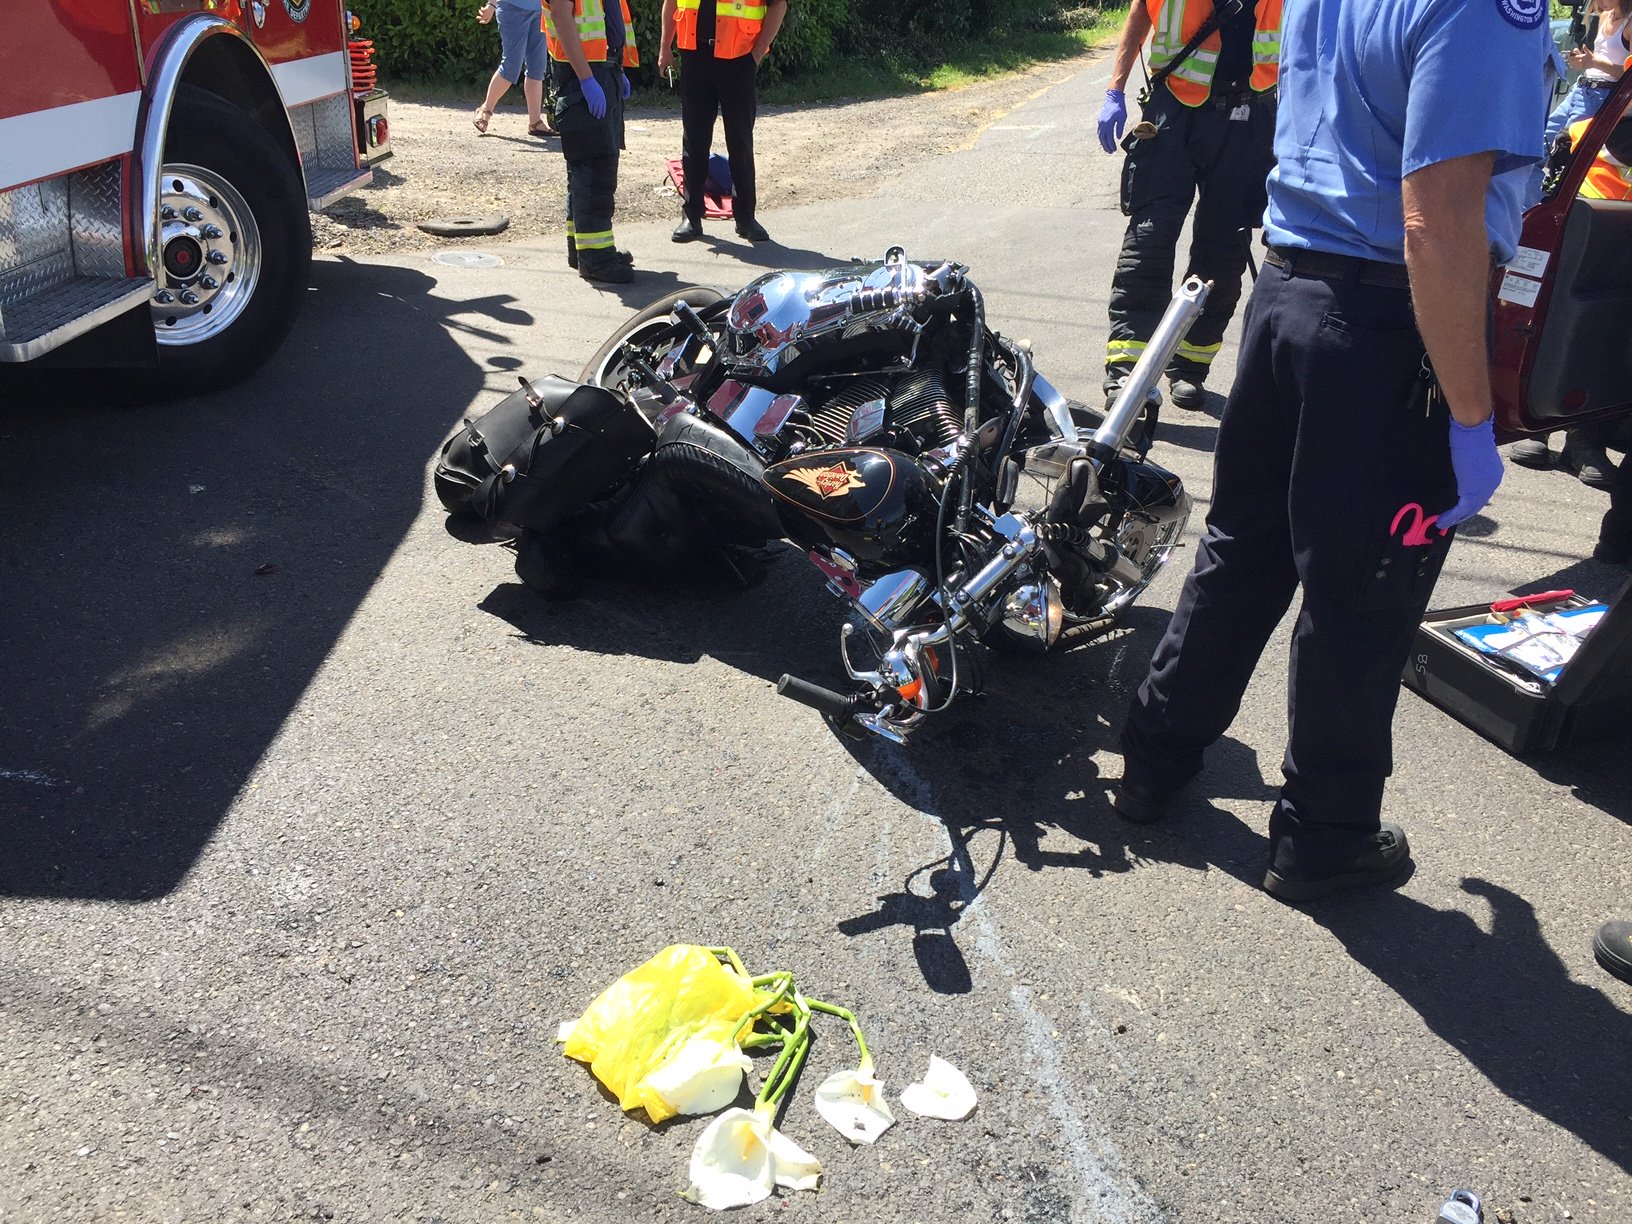 A man and woman riding this motorcycle were taken to PeaceHealth Southwest Medical Center with critical but non life-threatening injuries following a Thursday afternoon collision on Northeast 137th Avenue south of Fourth Plain Boulevard, according to the Vancouver Fire Department.